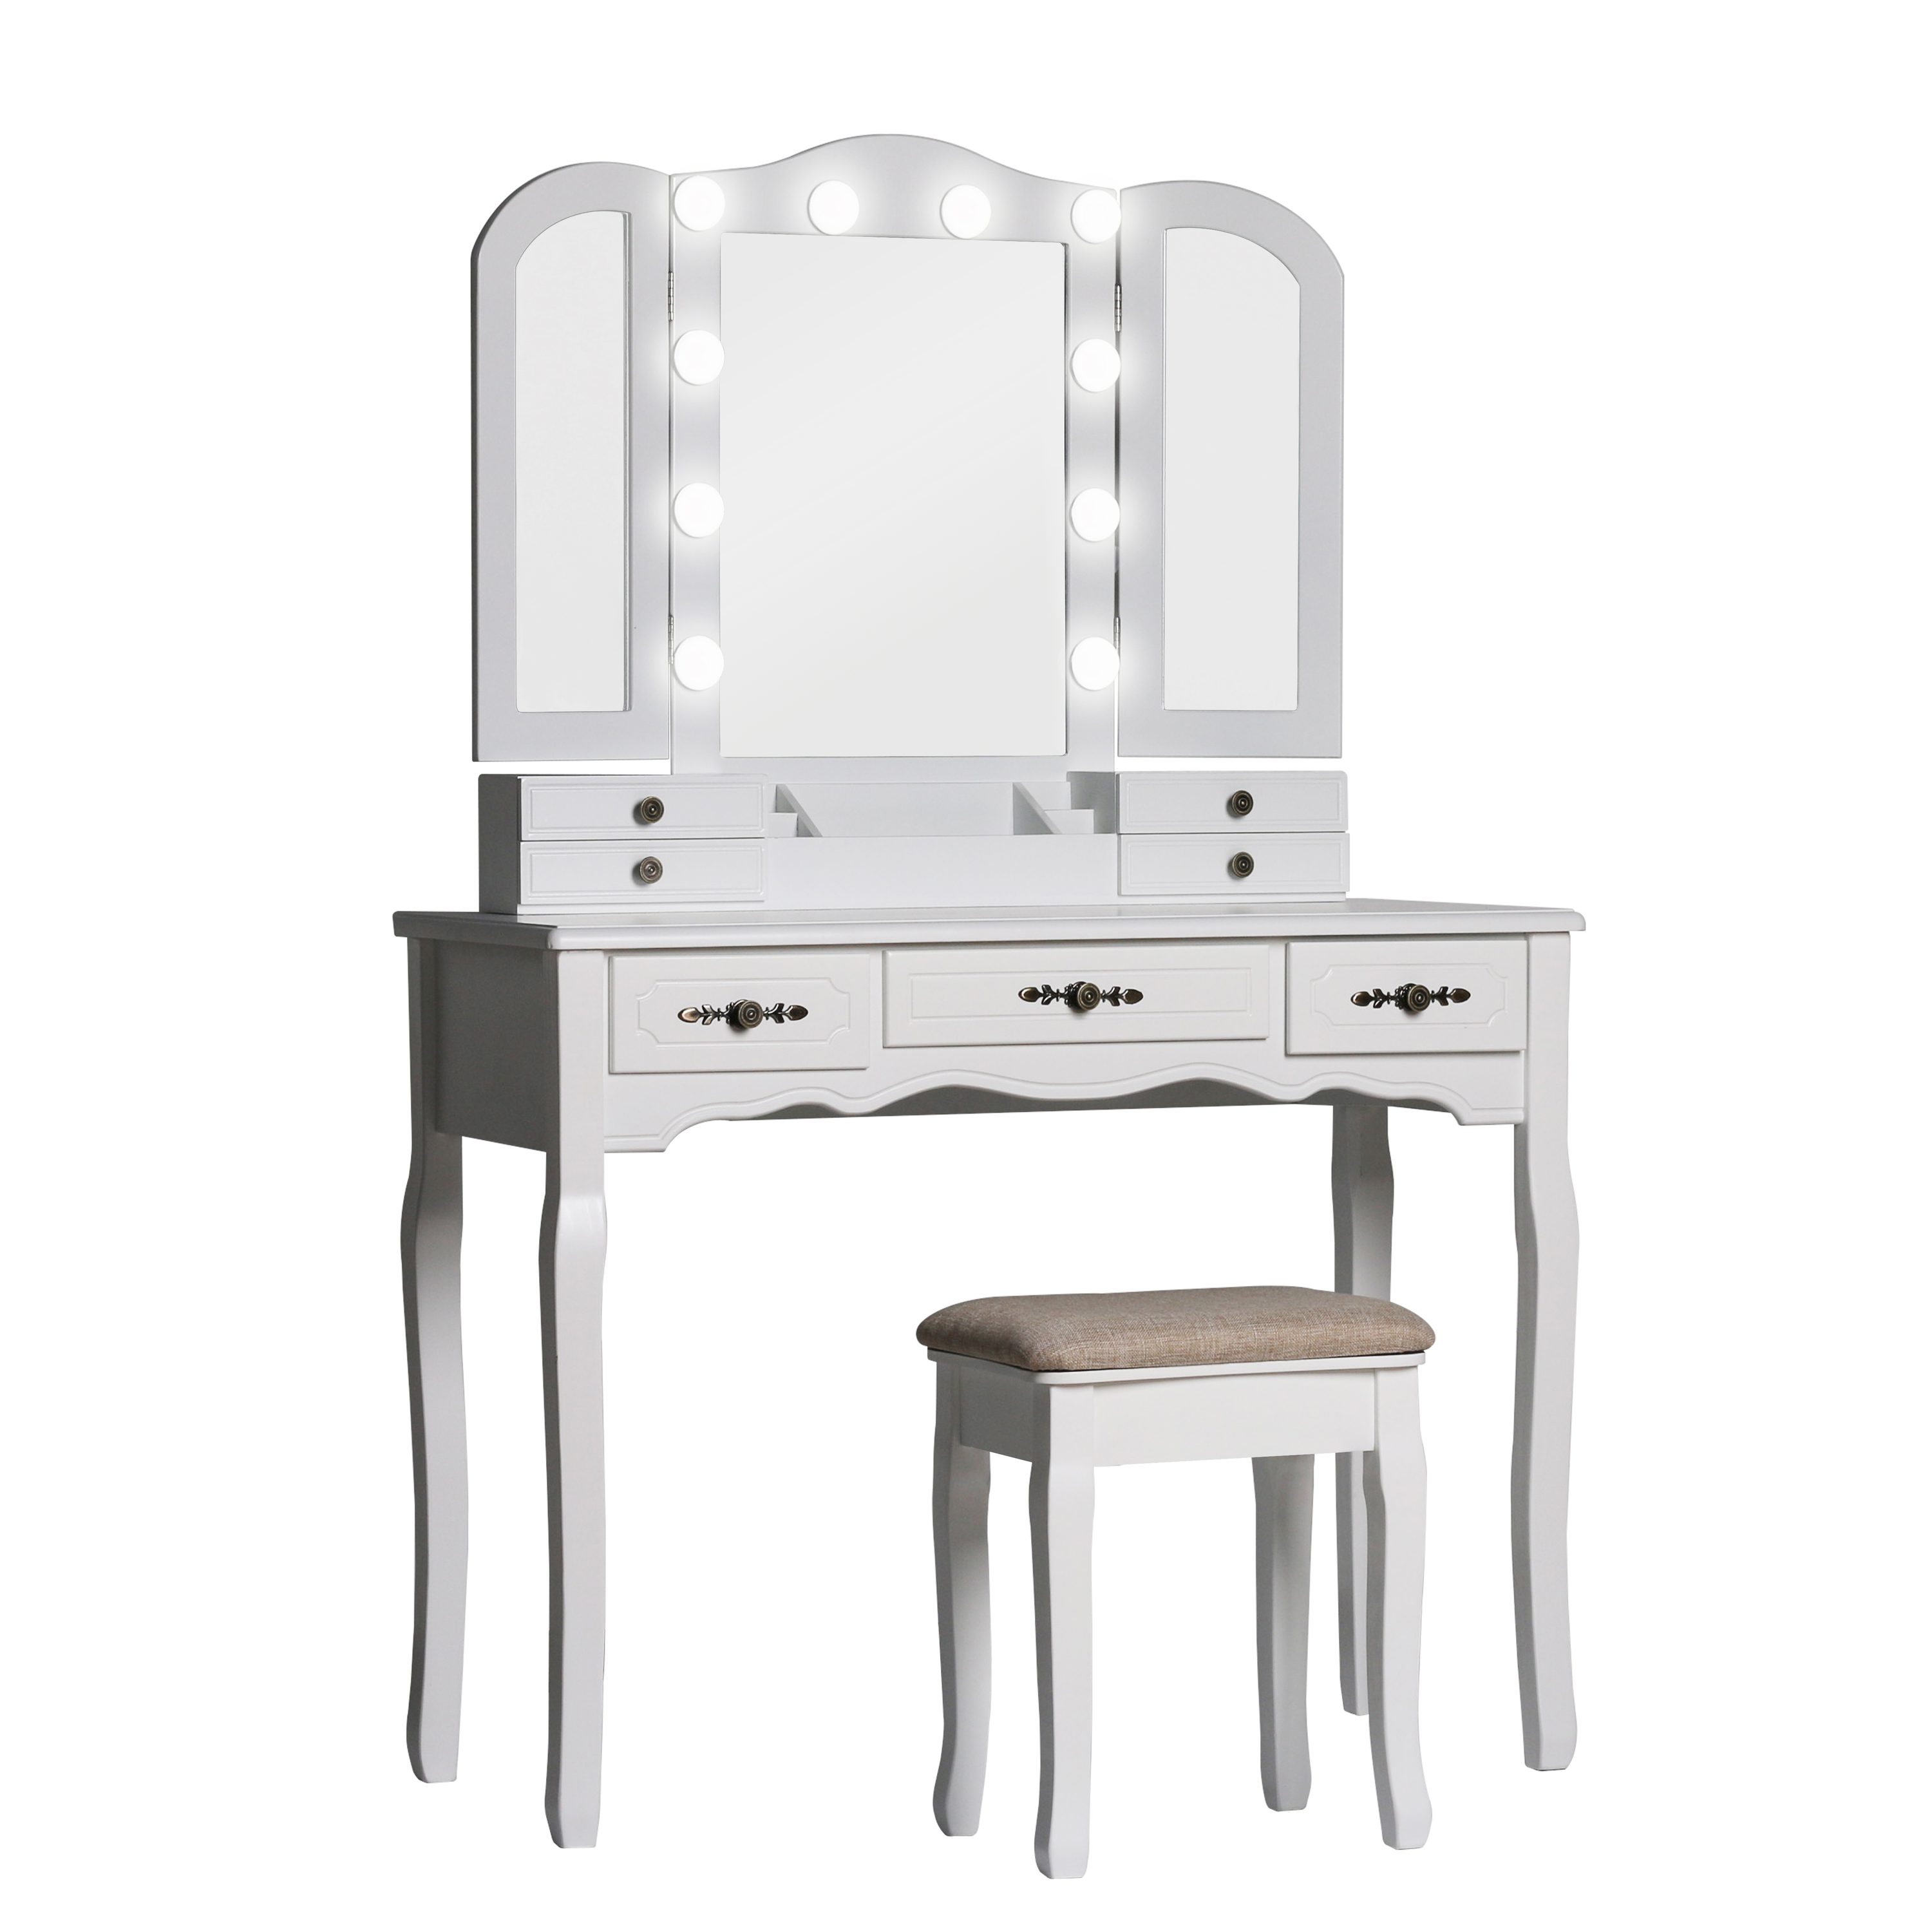 Veikous Makeup Vanity Desk Set With, Vanity Desk With Drawers And Lighted Mirror